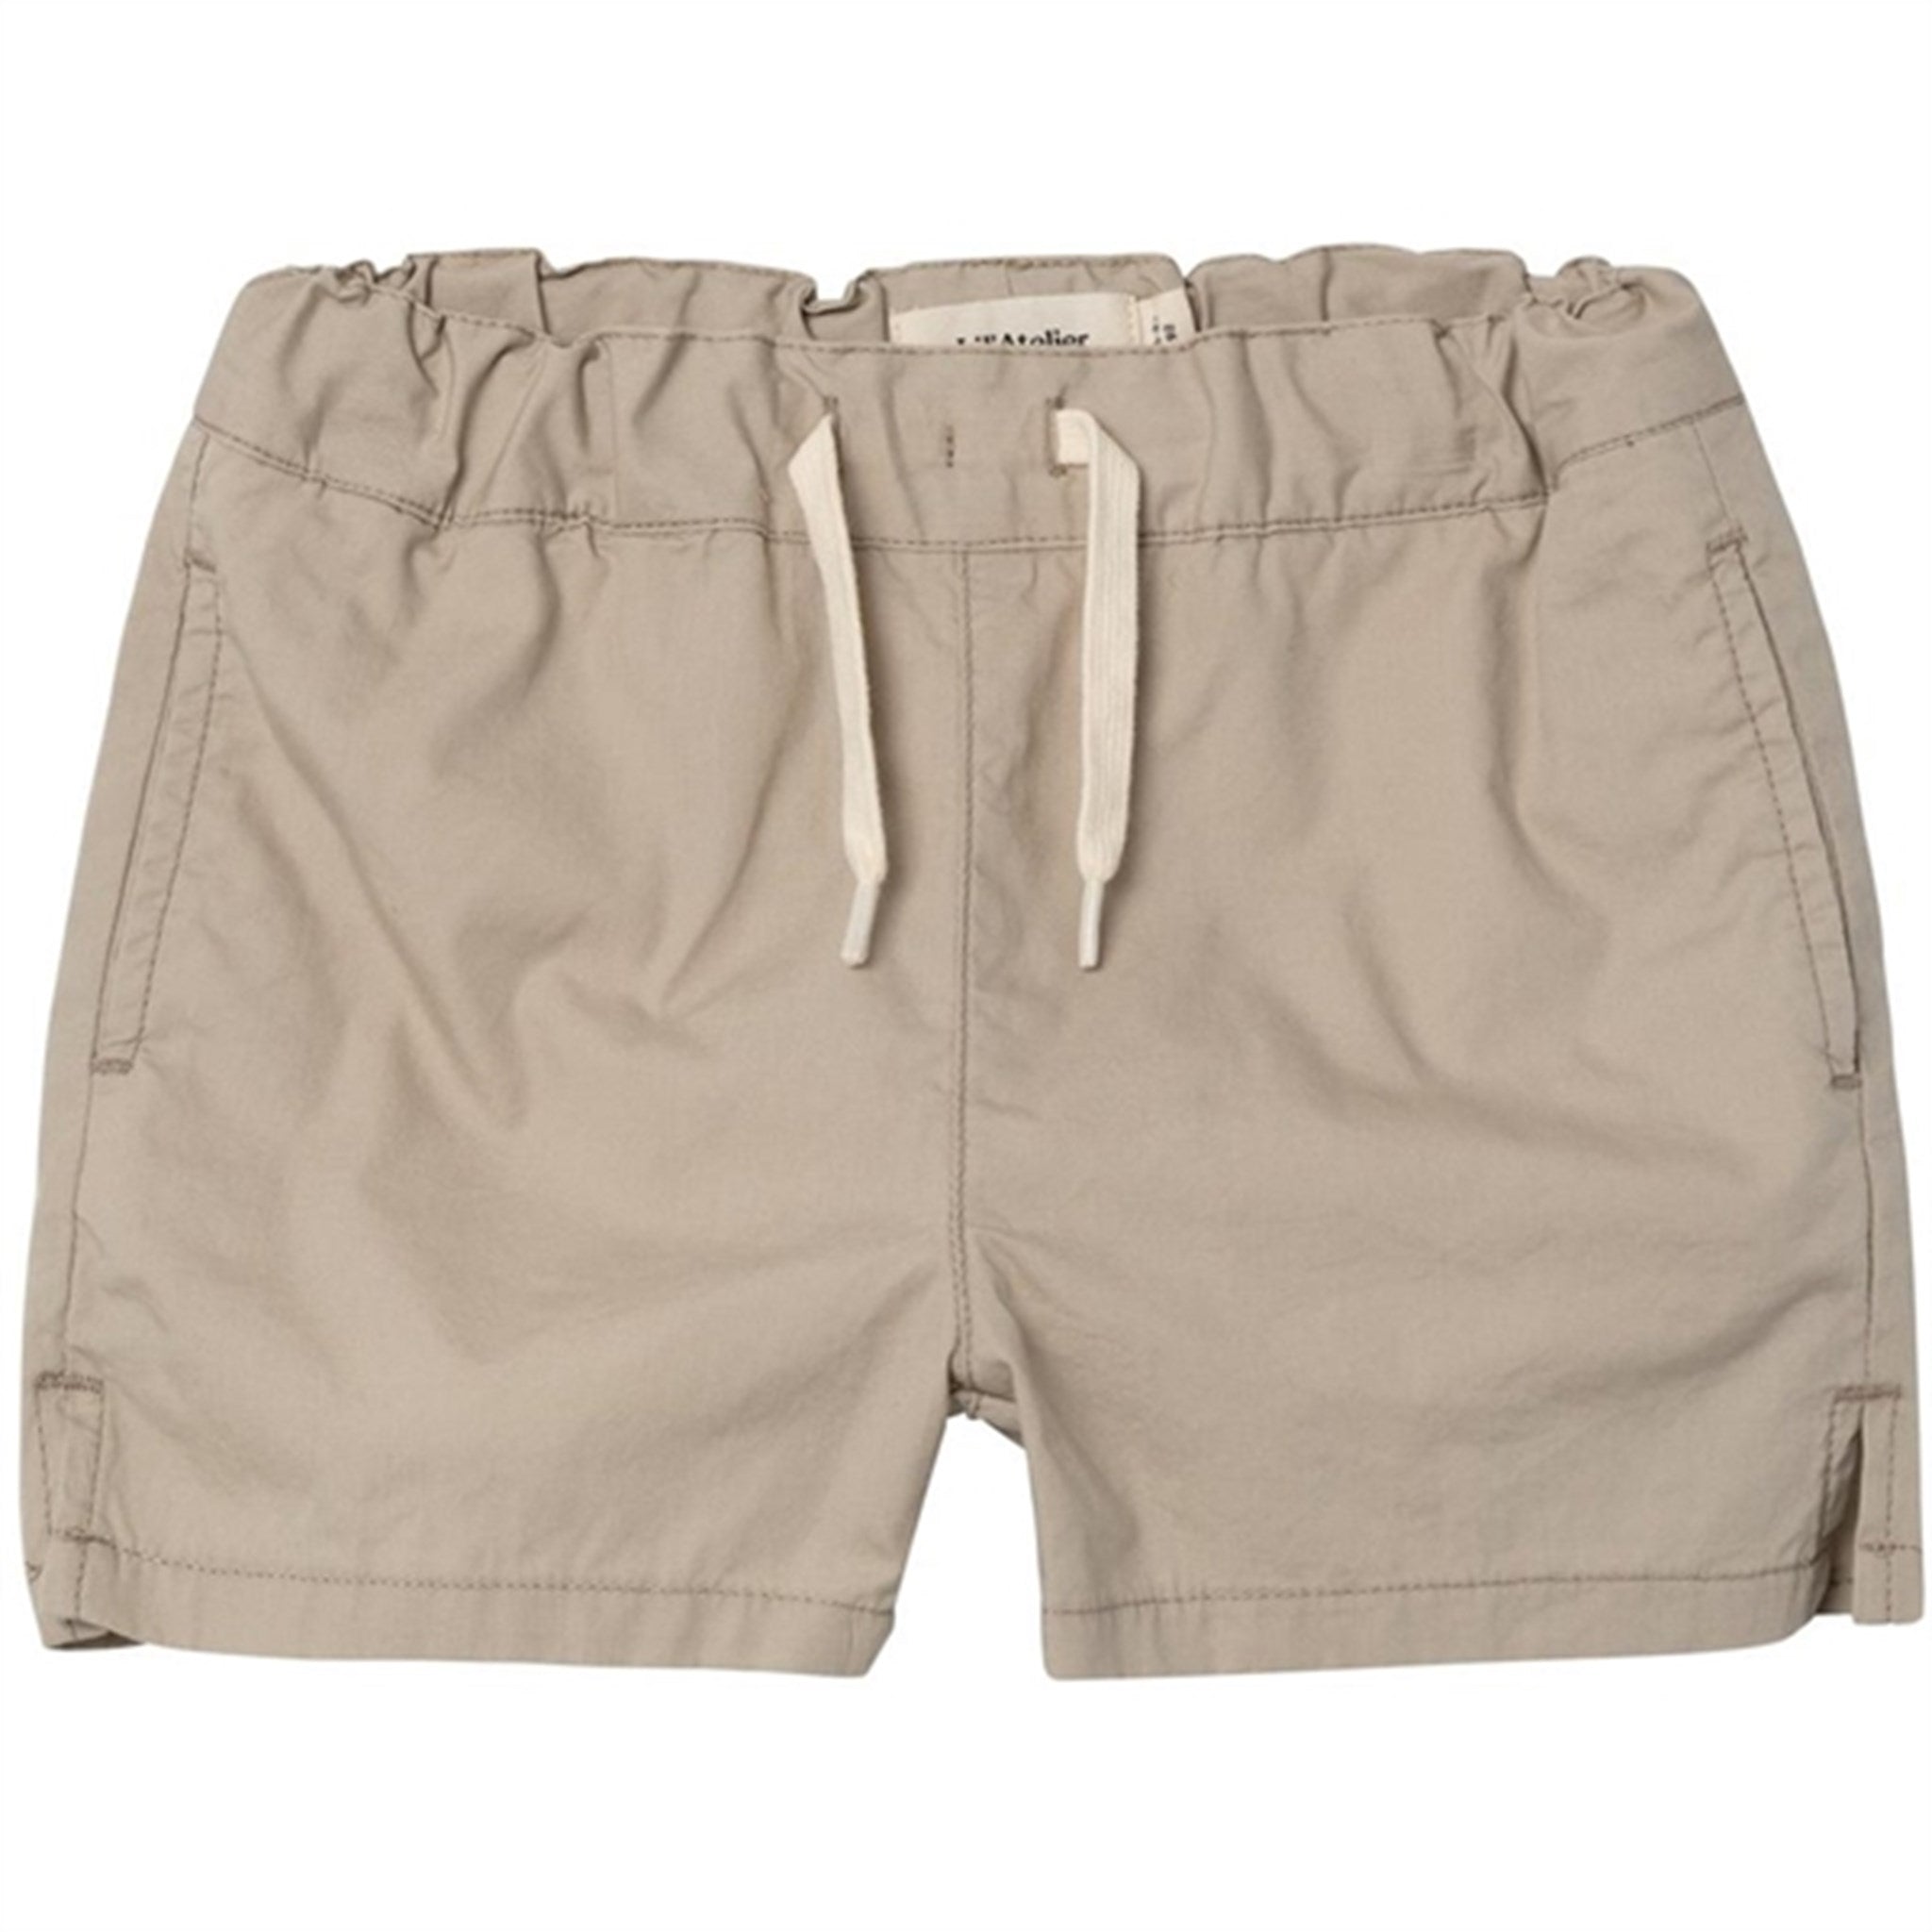 Lil'Atelier Pure Cashmere Fandy Badeshorts